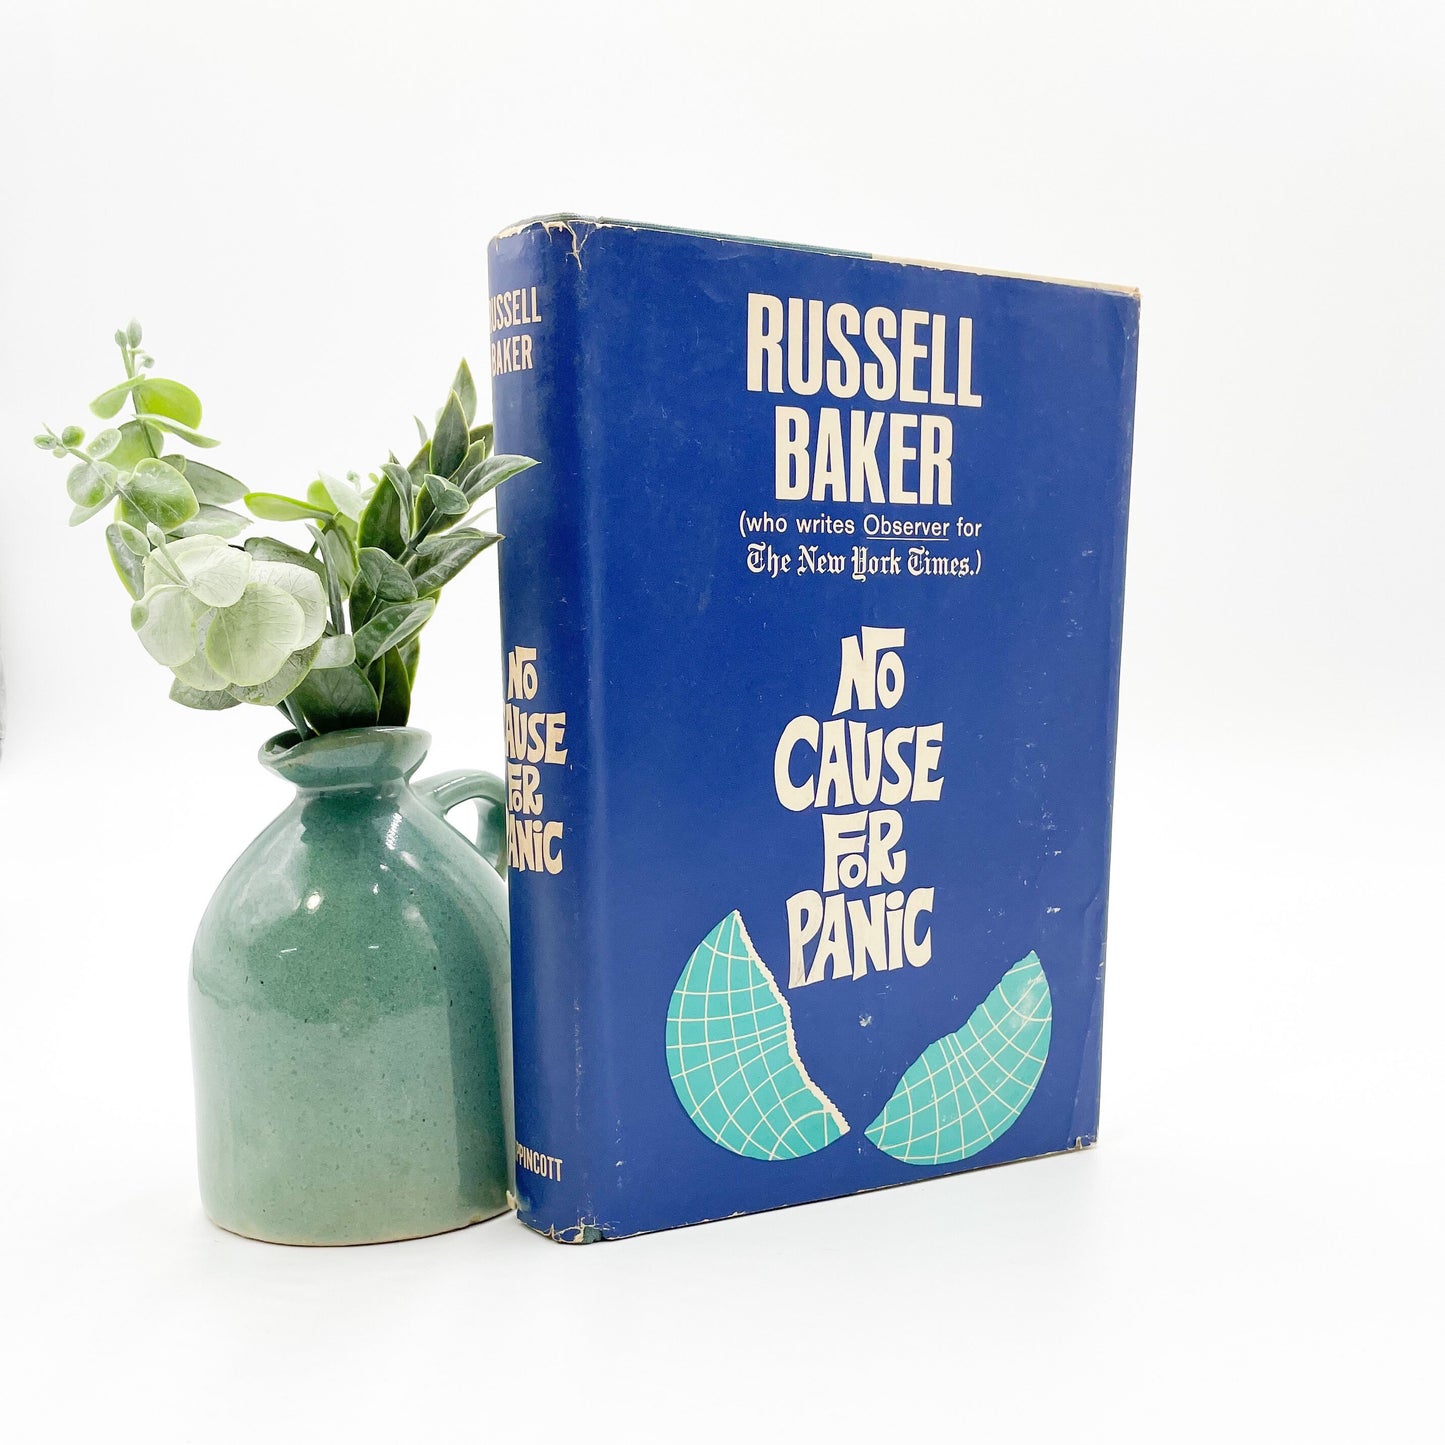 Rare Books, Signed First Edition, No Cause for Panic by Russell Baker